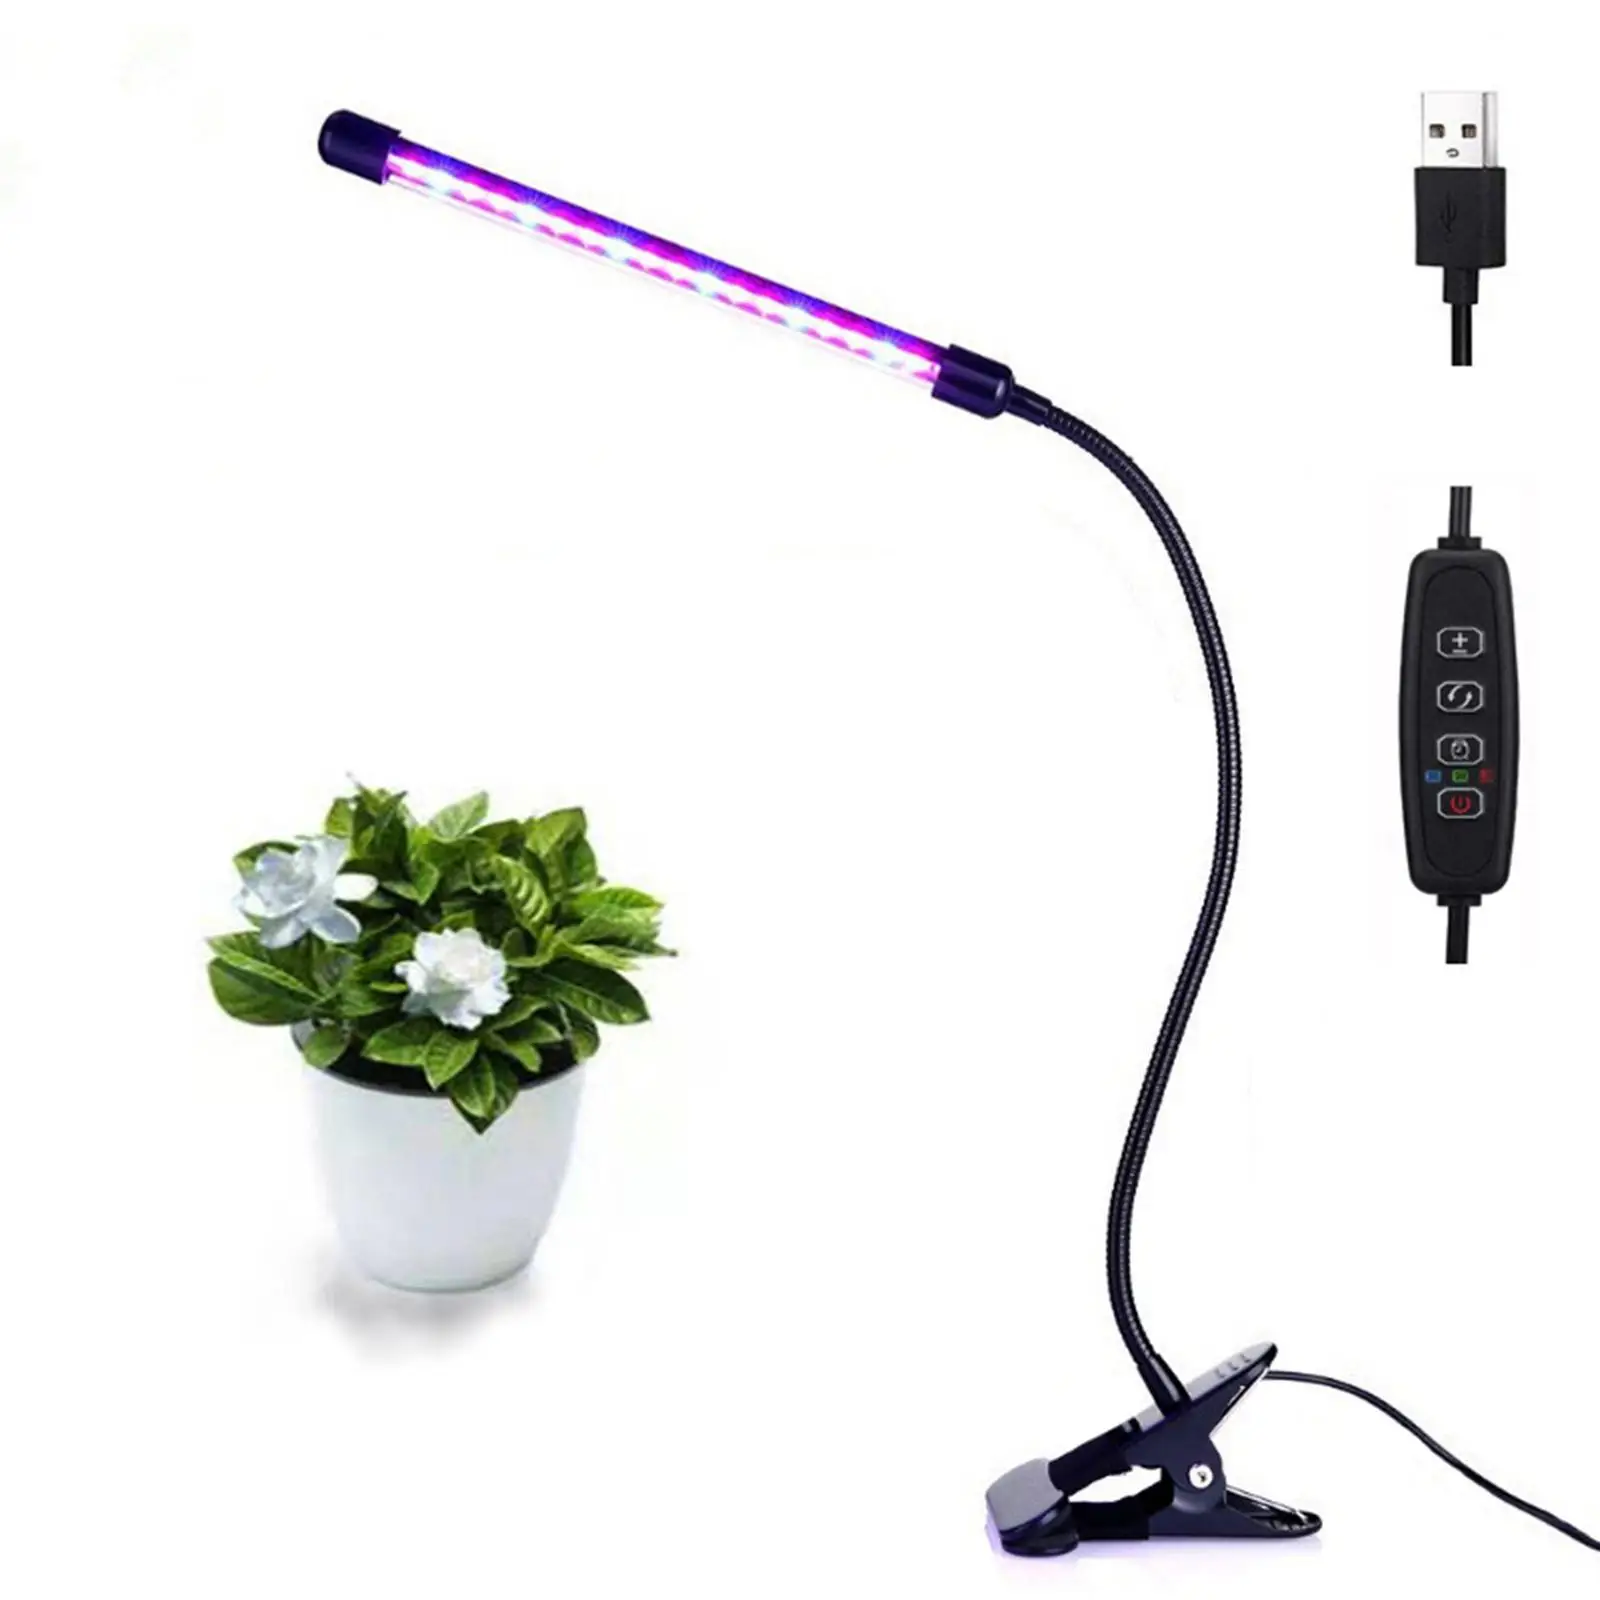 Clip Plant Growing Lamp Auto Off Timing 3 9 12Hrs LED Grow Light for Gardening Flowers Vegetable Seedling Indoor Plants